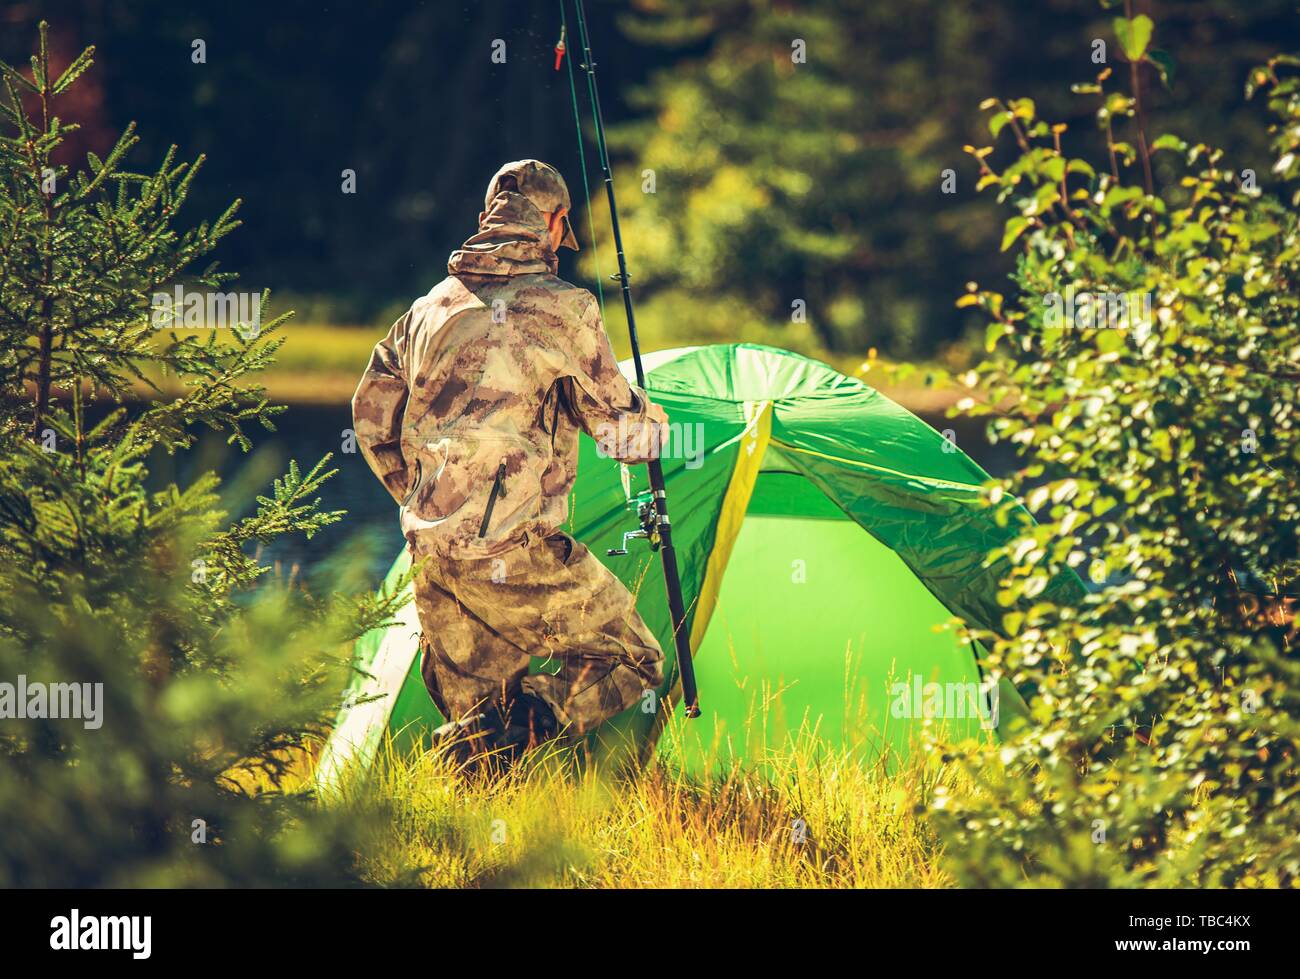 Fly Fishing Camp in a Wilderness. Caucasian Men with Fishing Rod in Hand in Front of His Tent. Closeup Photo. Stock Photo